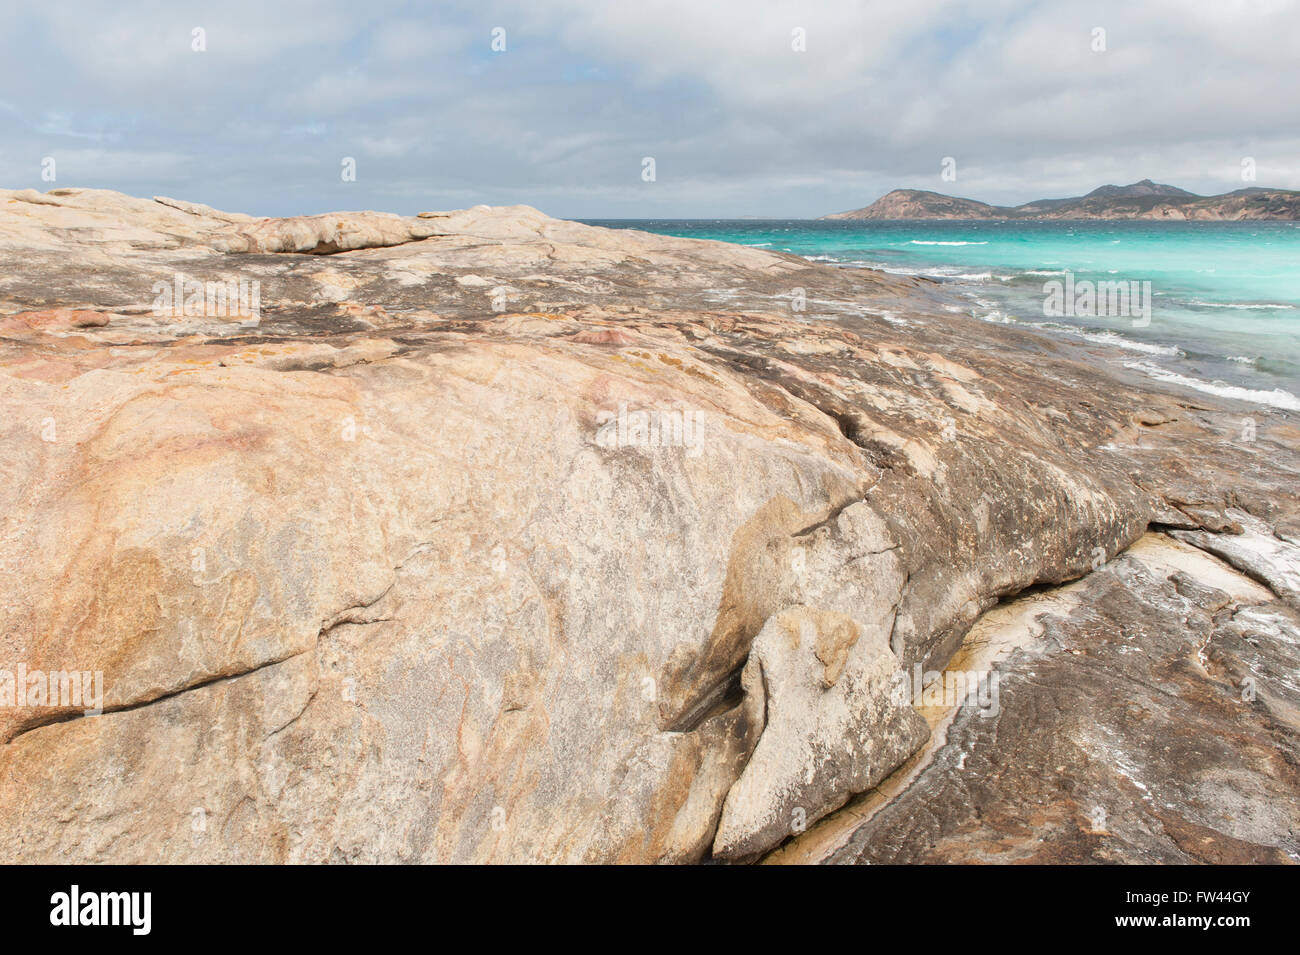 Granite outcrops and turquoise waters at Wylie Bay east of Esperance, Western Australia Stock Photo